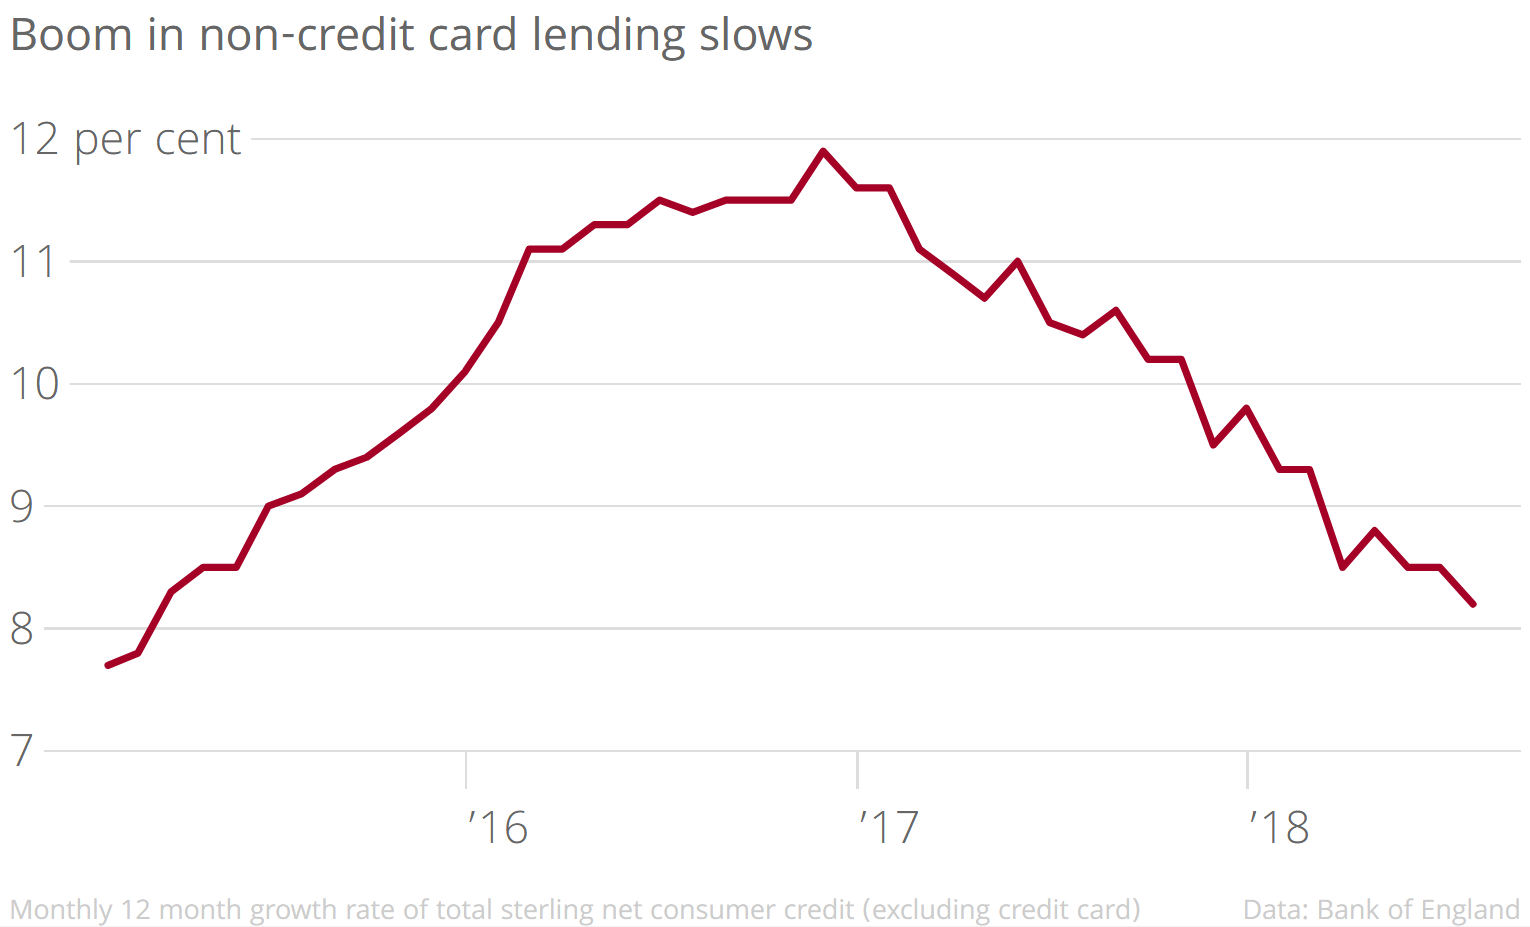 A graph showing non-credit card consumer credit growth slowing